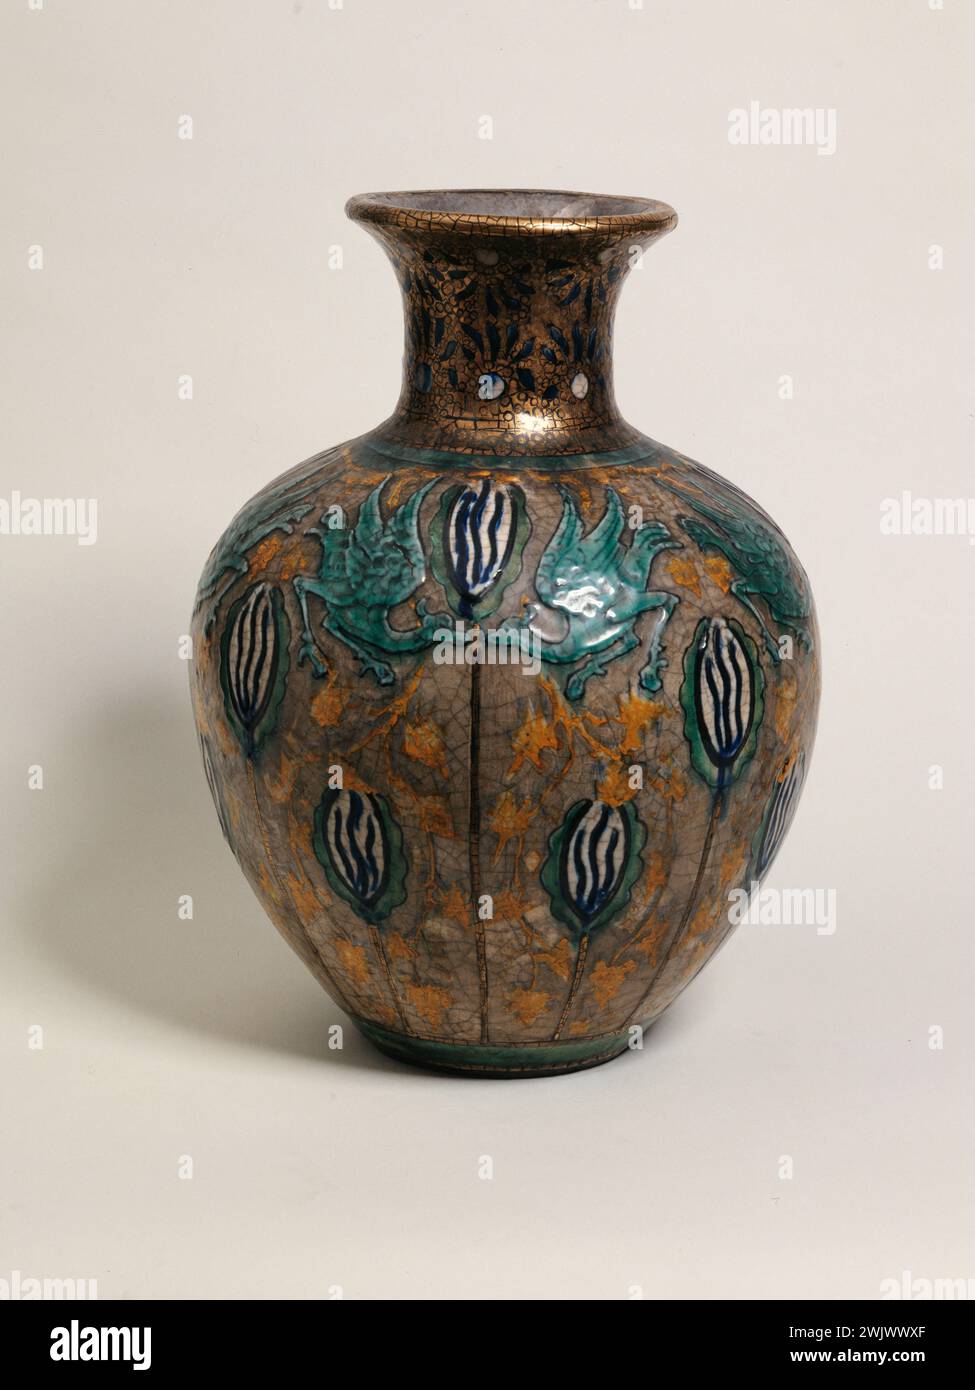 André Metthey (1871-1920). Vase. Earthenware. Museum of Fine Arts of the City of Paris, Petit Palais. Art Menager, Dragon, Faience, Crockery, Vase, XIXth 19th 19th 19 19th 19th century Stock Photo